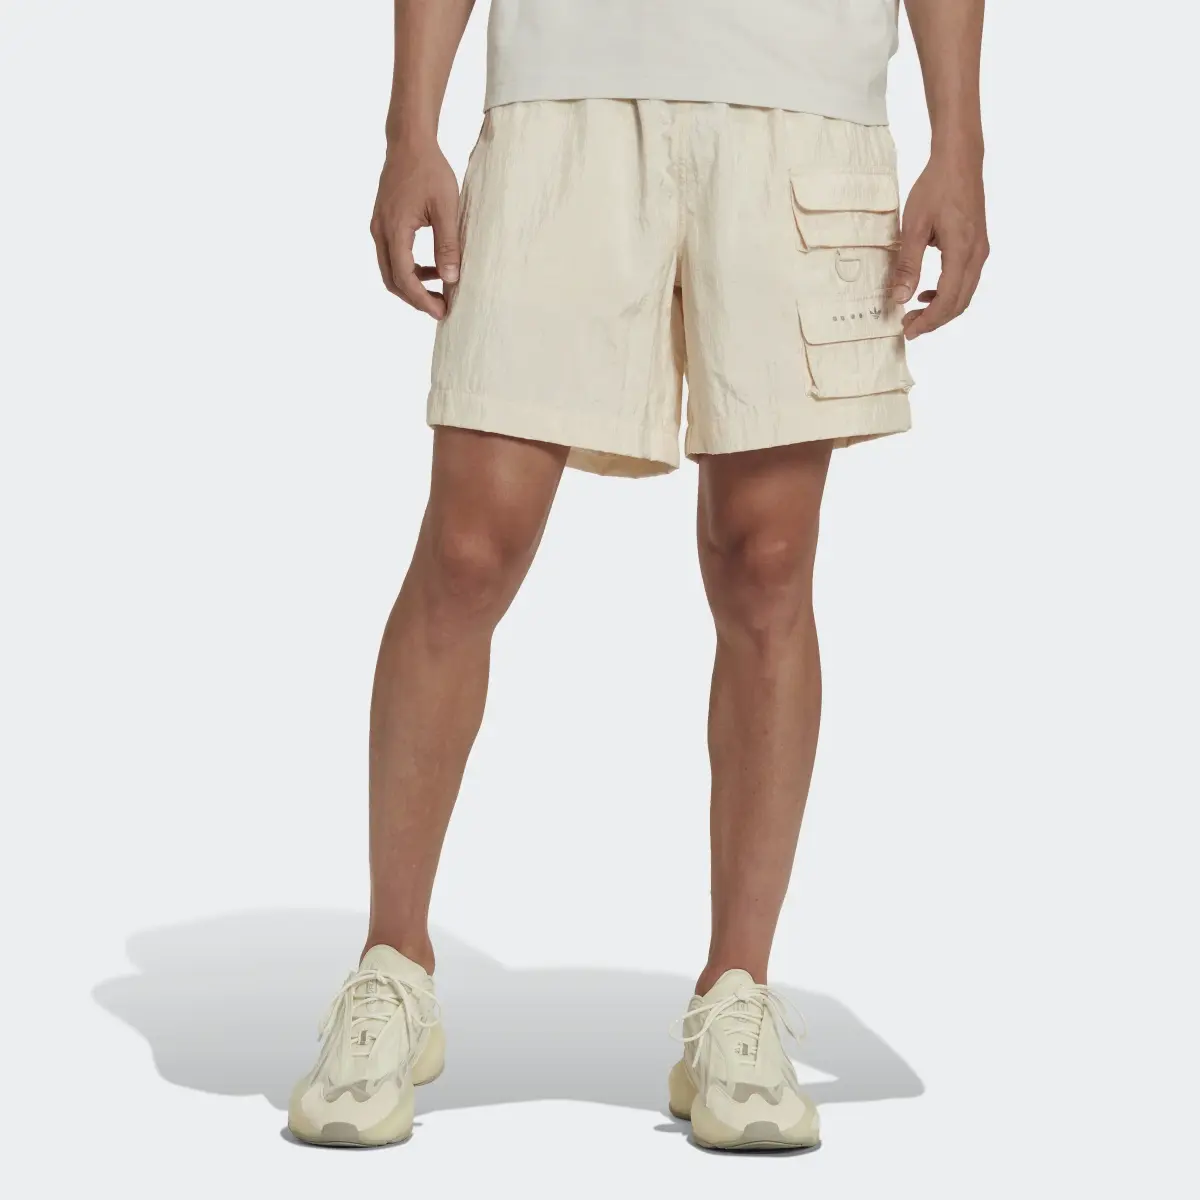 Adidas Reveal Material Mix Shorts. 1